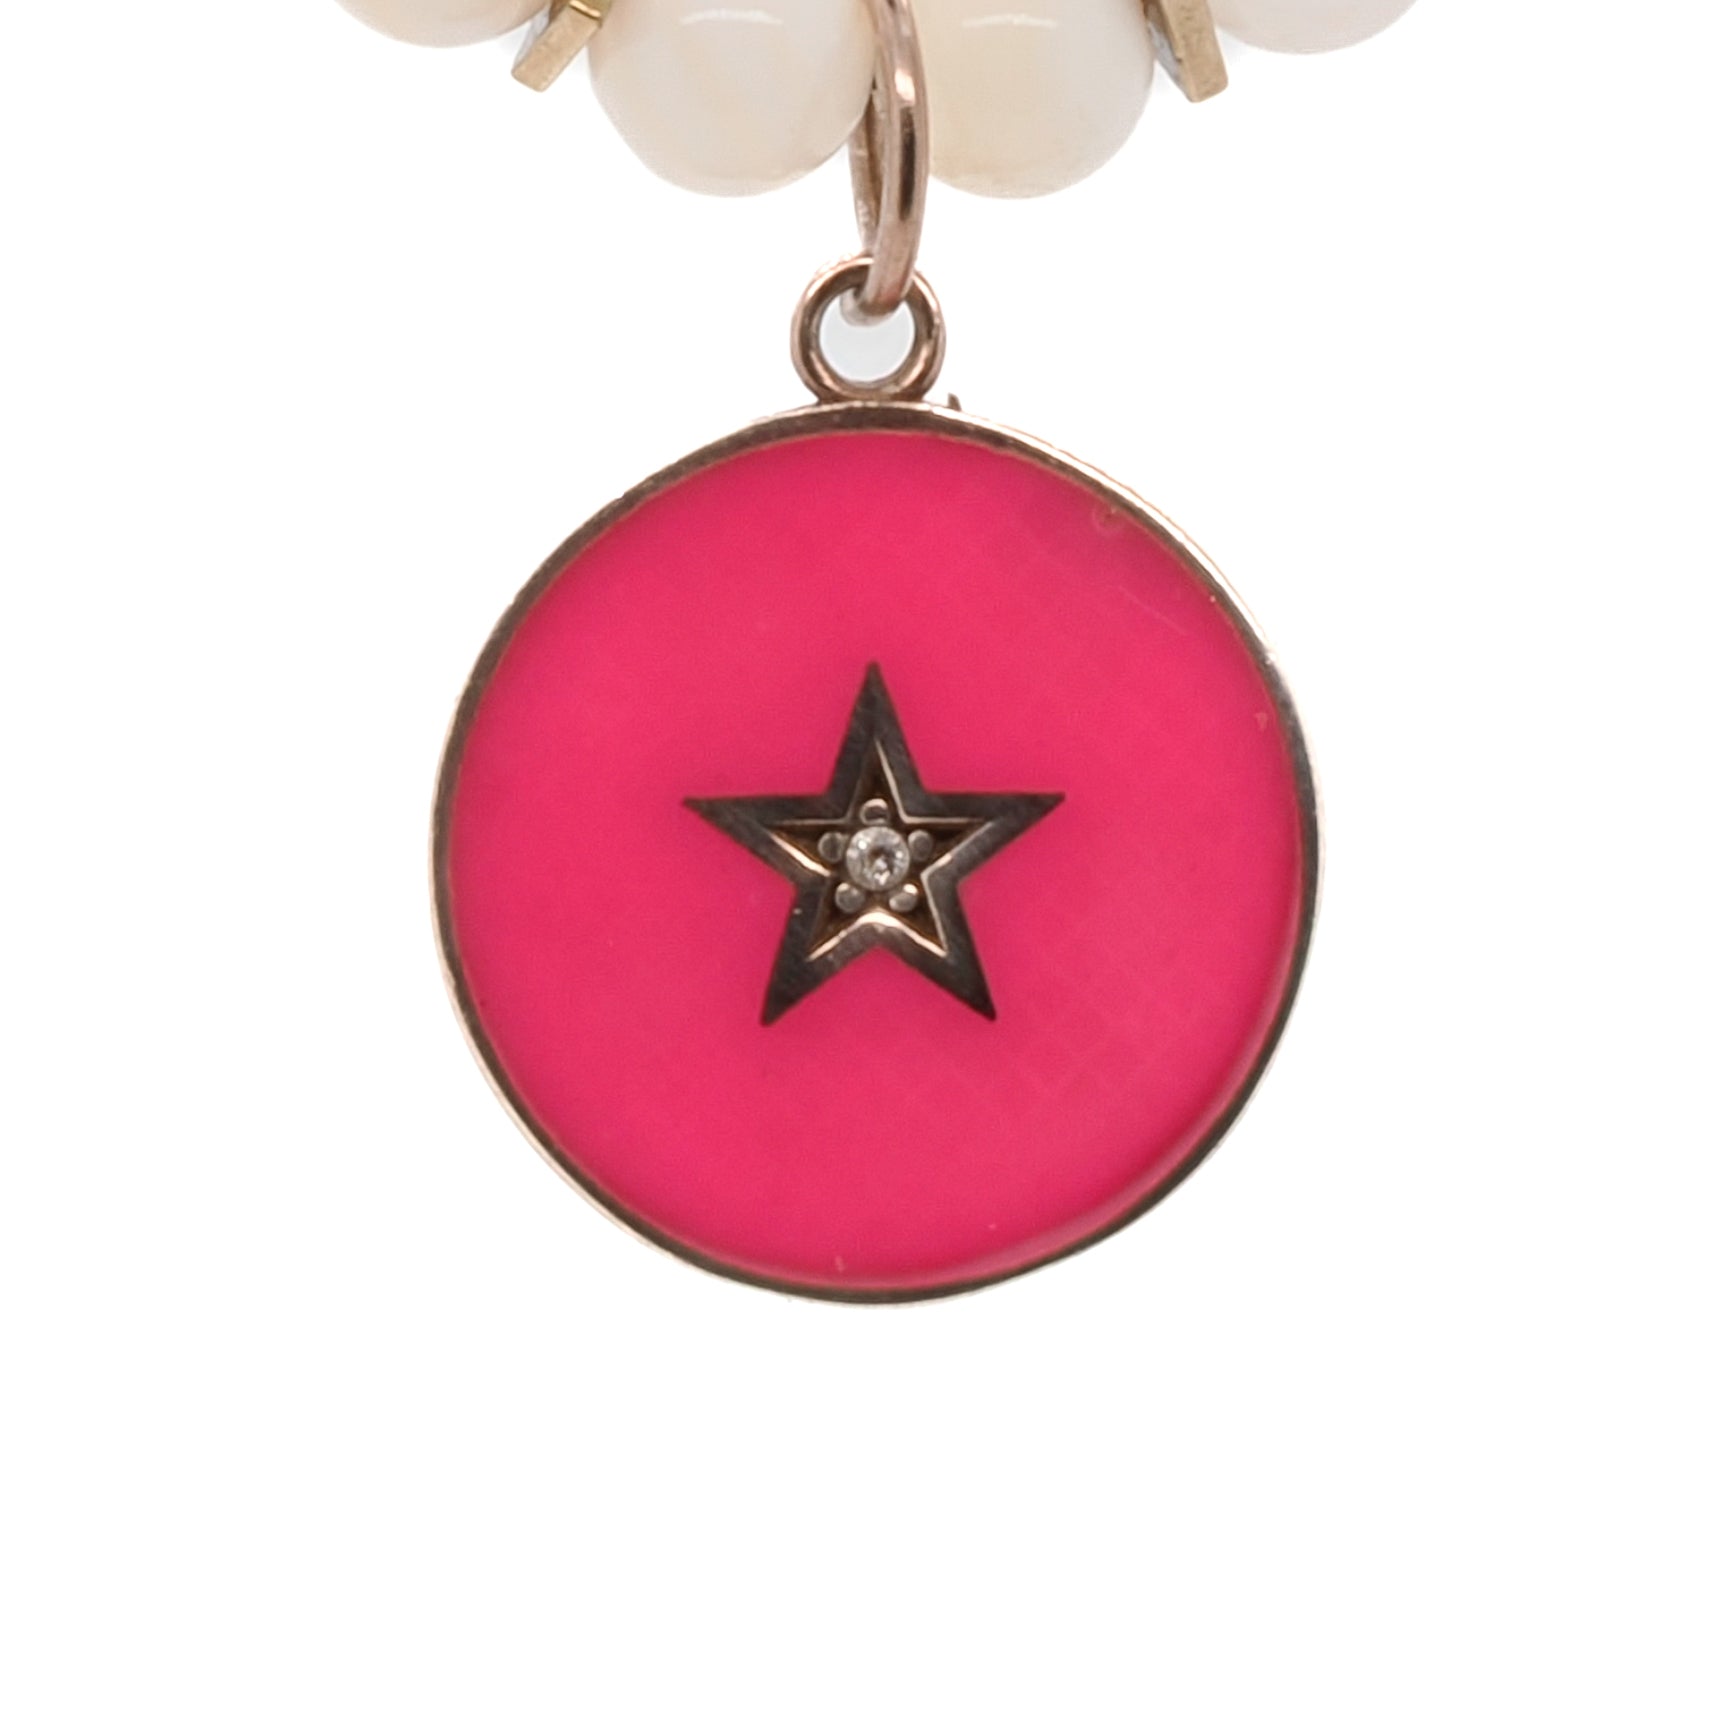 Illuminate your style with the Pink Star White Choker Necklace, a dazzling piece adorned with gold hematite spacers and a pink enamel star charm.